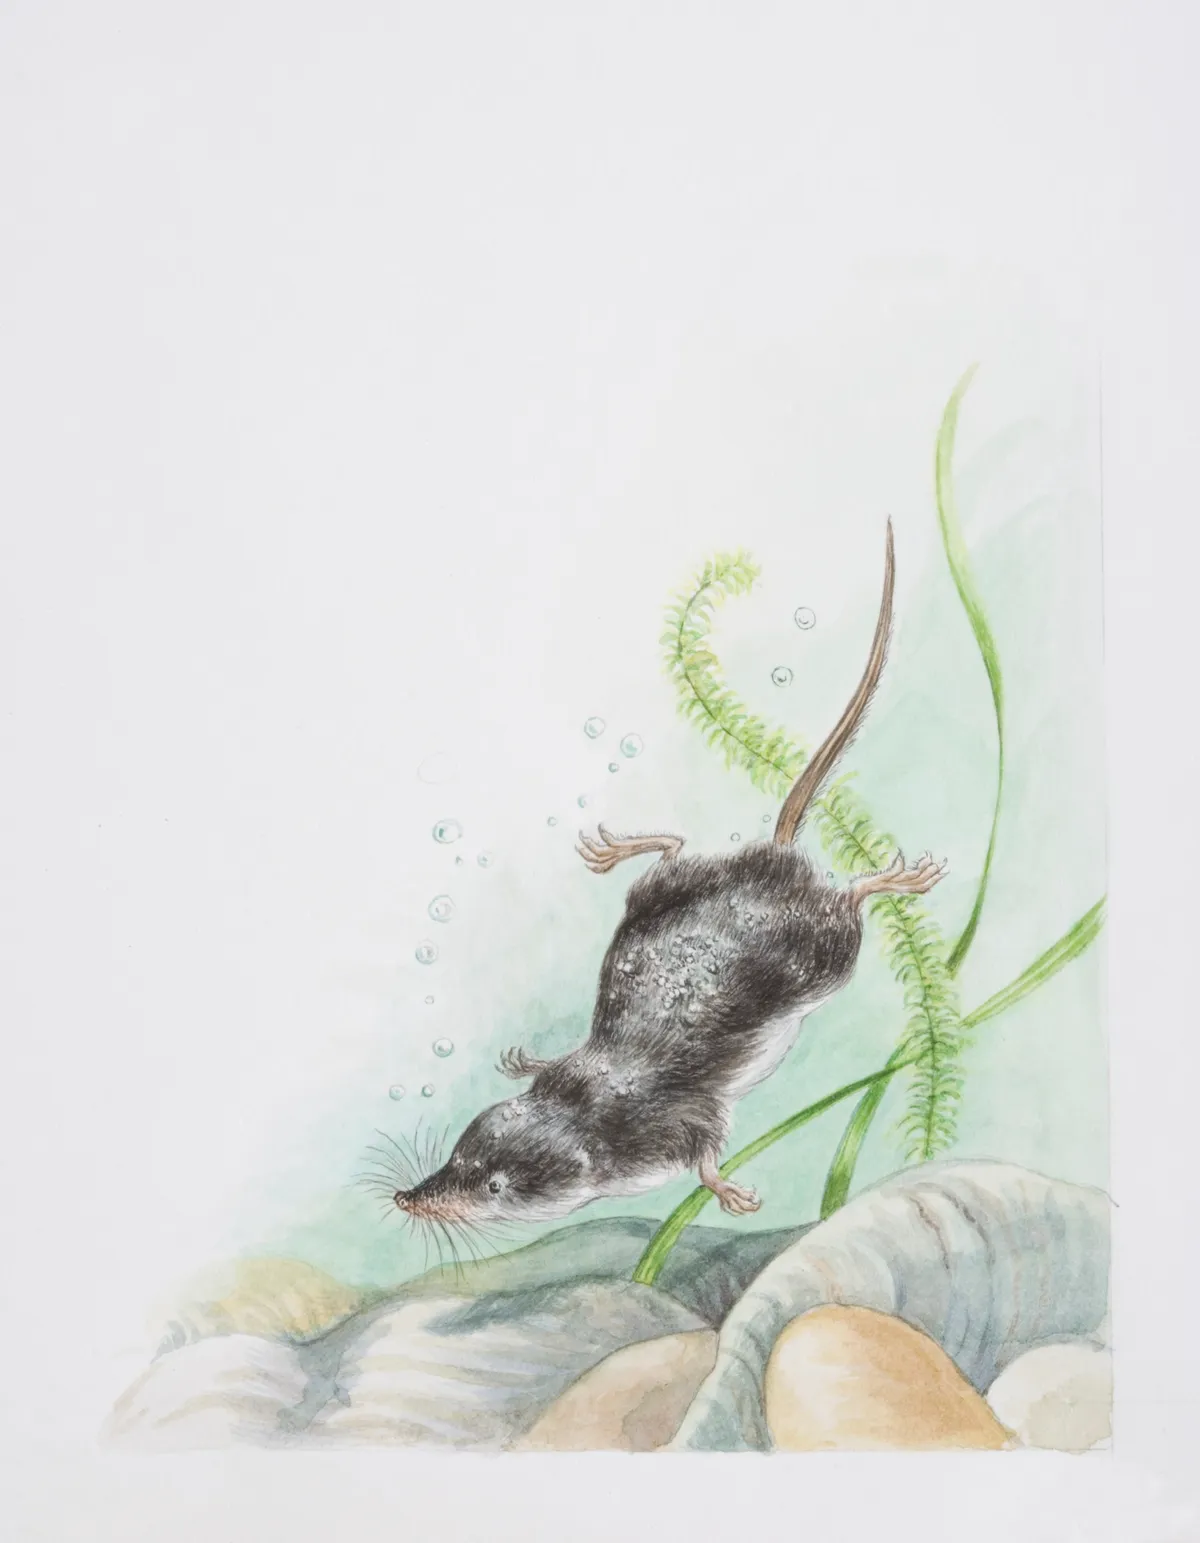 Illustration of a water vole swimming underwater. © Gill Tomblin/Getty